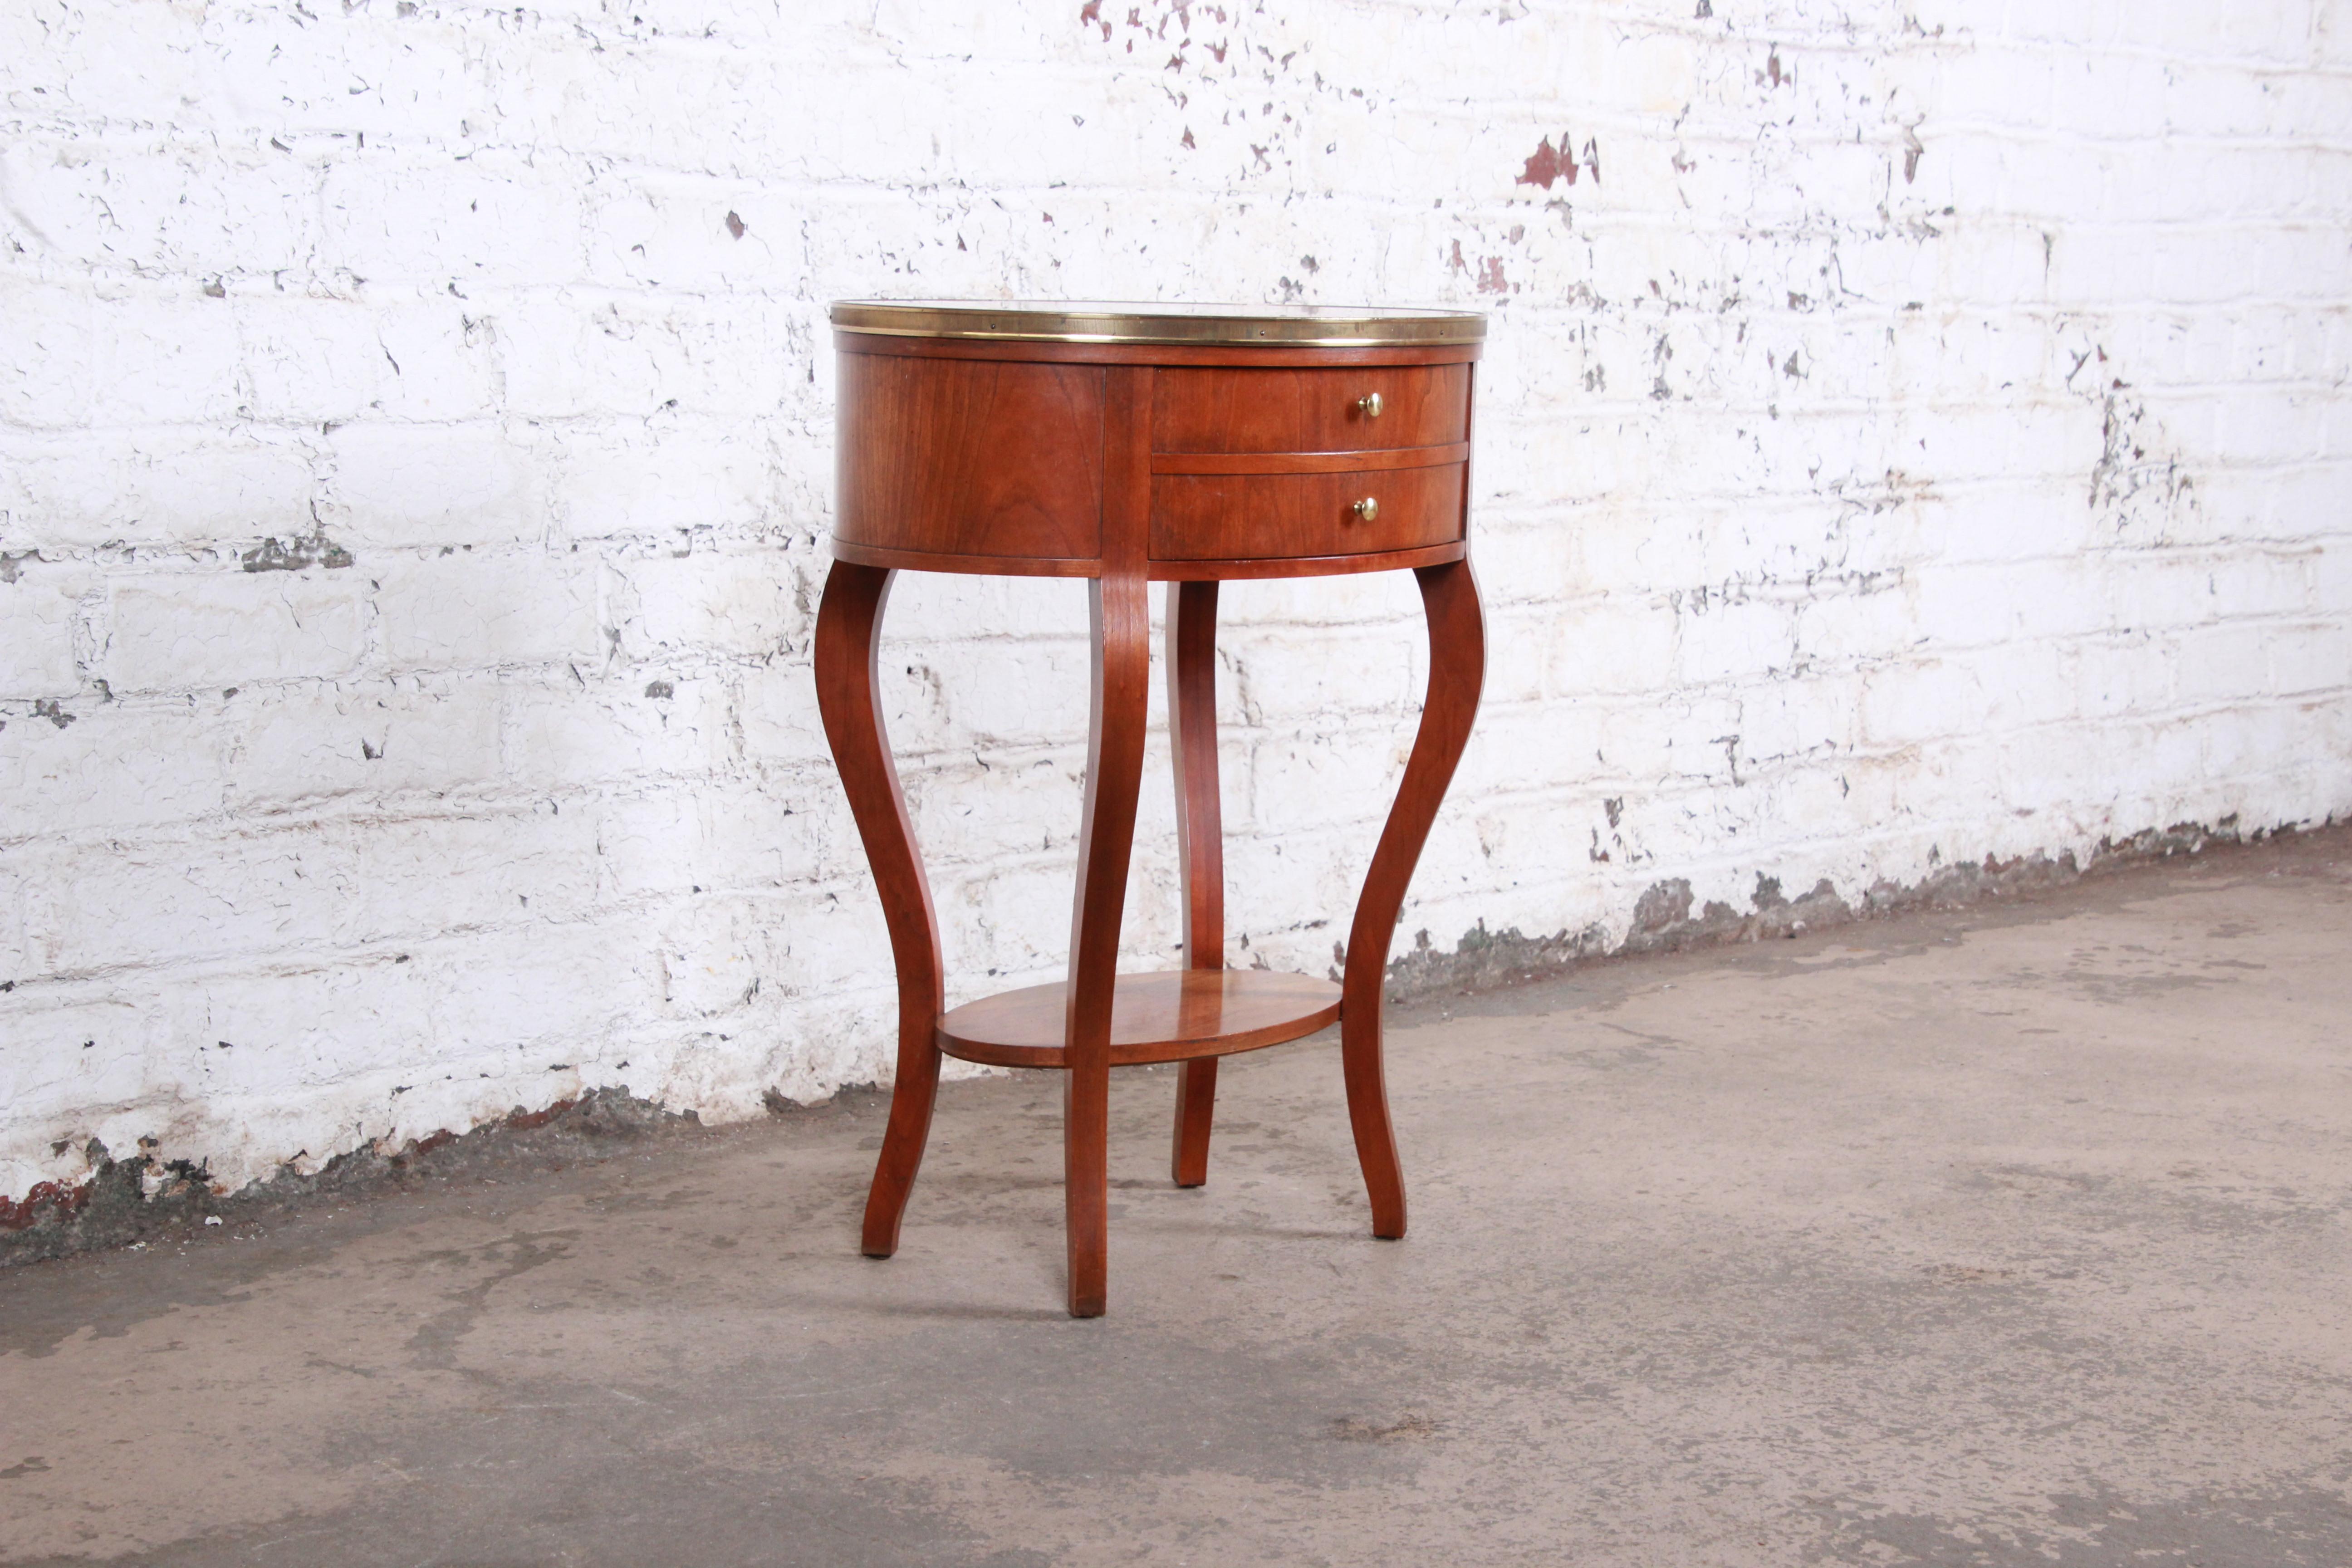 French Regency mahogany and brass side table

Made by Baker Furniture Company

USA, Late 20th century

Cabriole legs and brass trim

Dimensions: 21